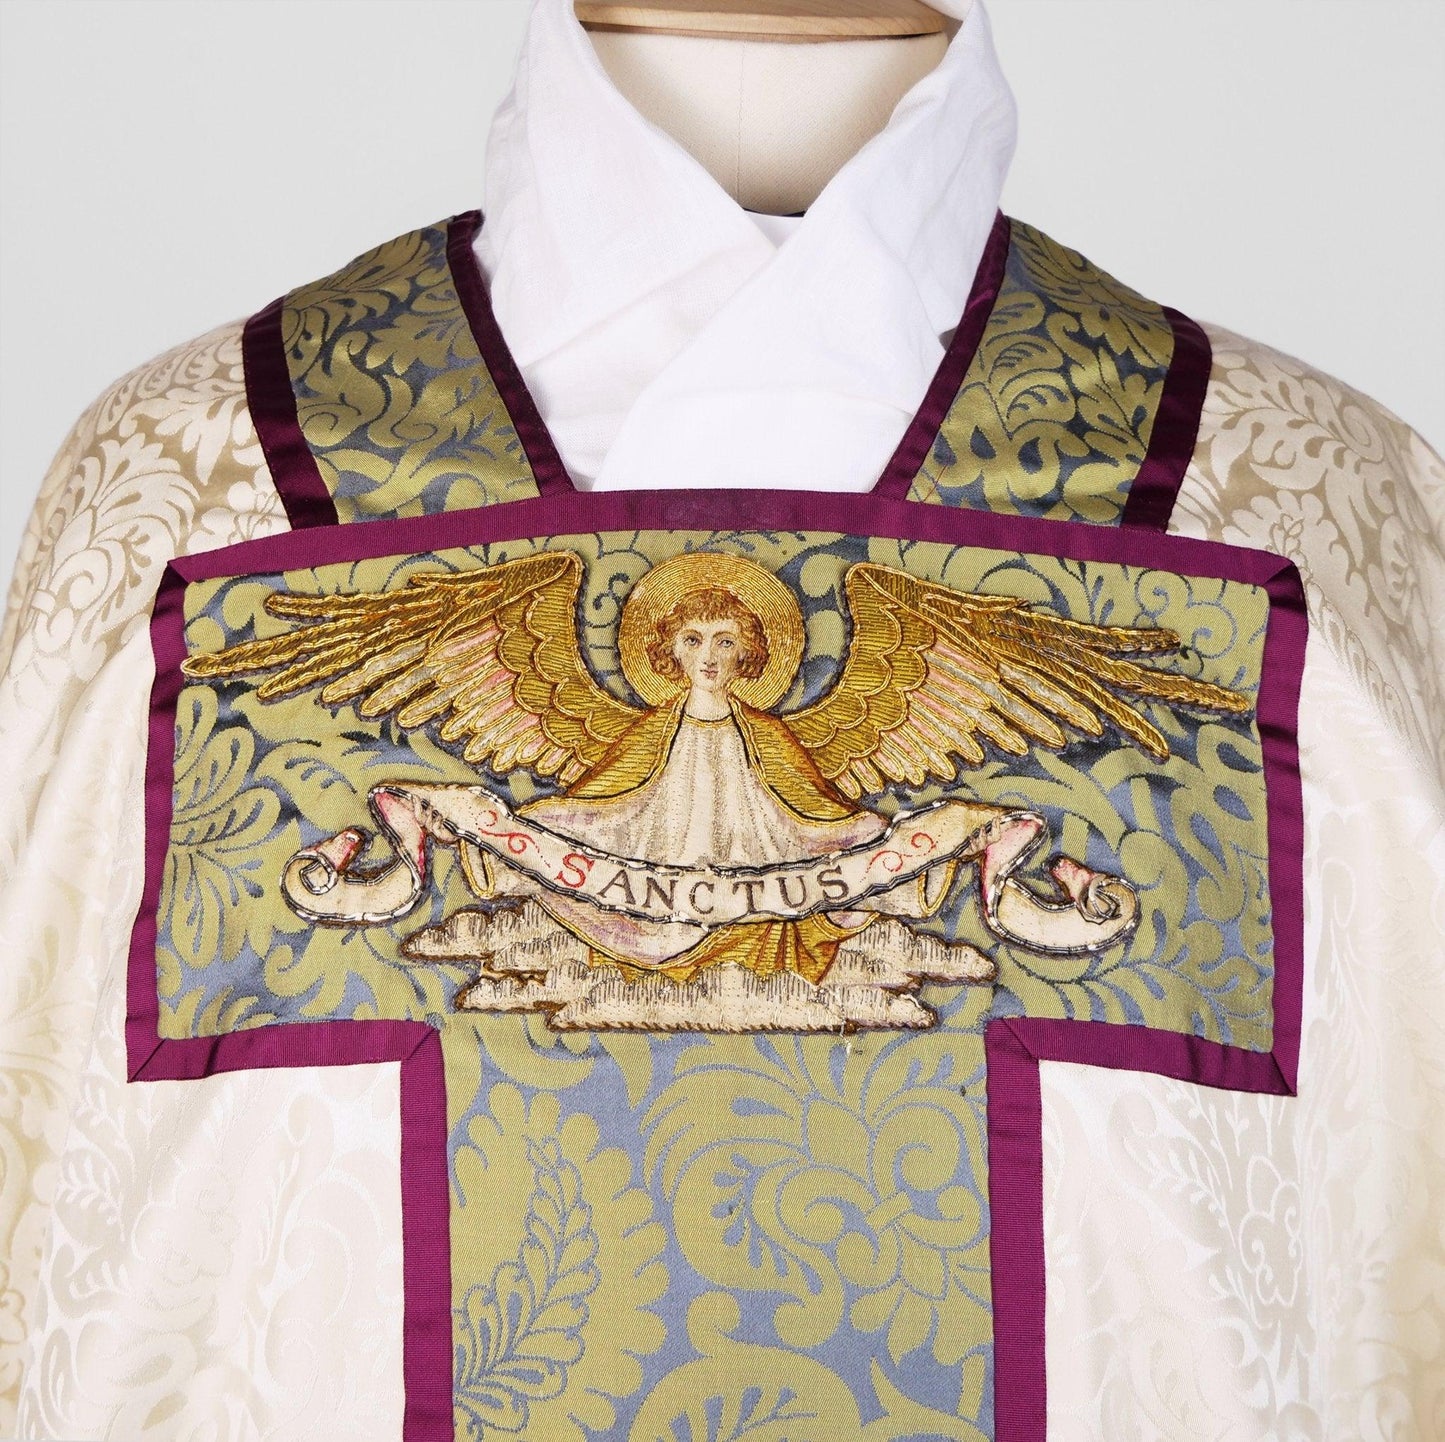 Borromean Chasuble in Cream 'Holbein' with Canterbury Blue/Gold 'Holbein' Orphreys - Watts & Co.